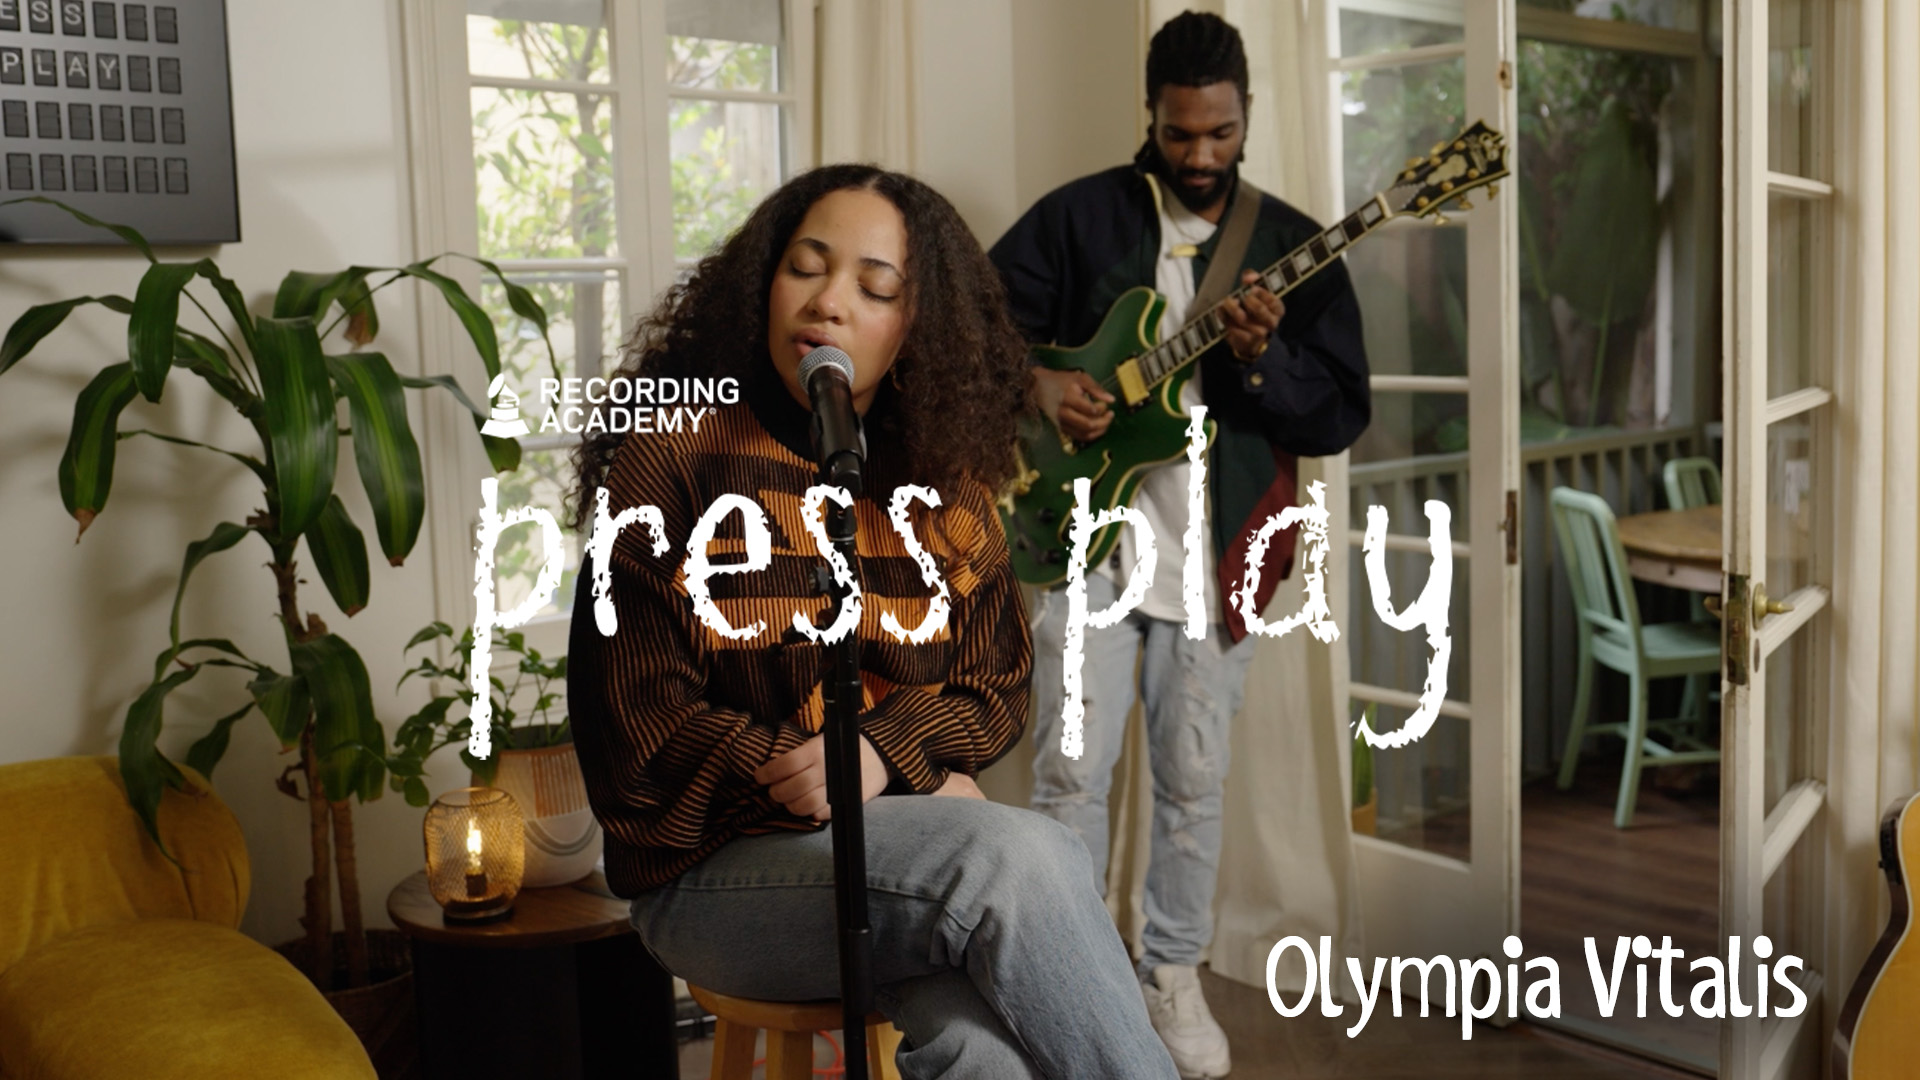 Watch Olympia Vitalis Embrace Her Natural Beauty With An Empowering Performance of “Curls” | Press Play